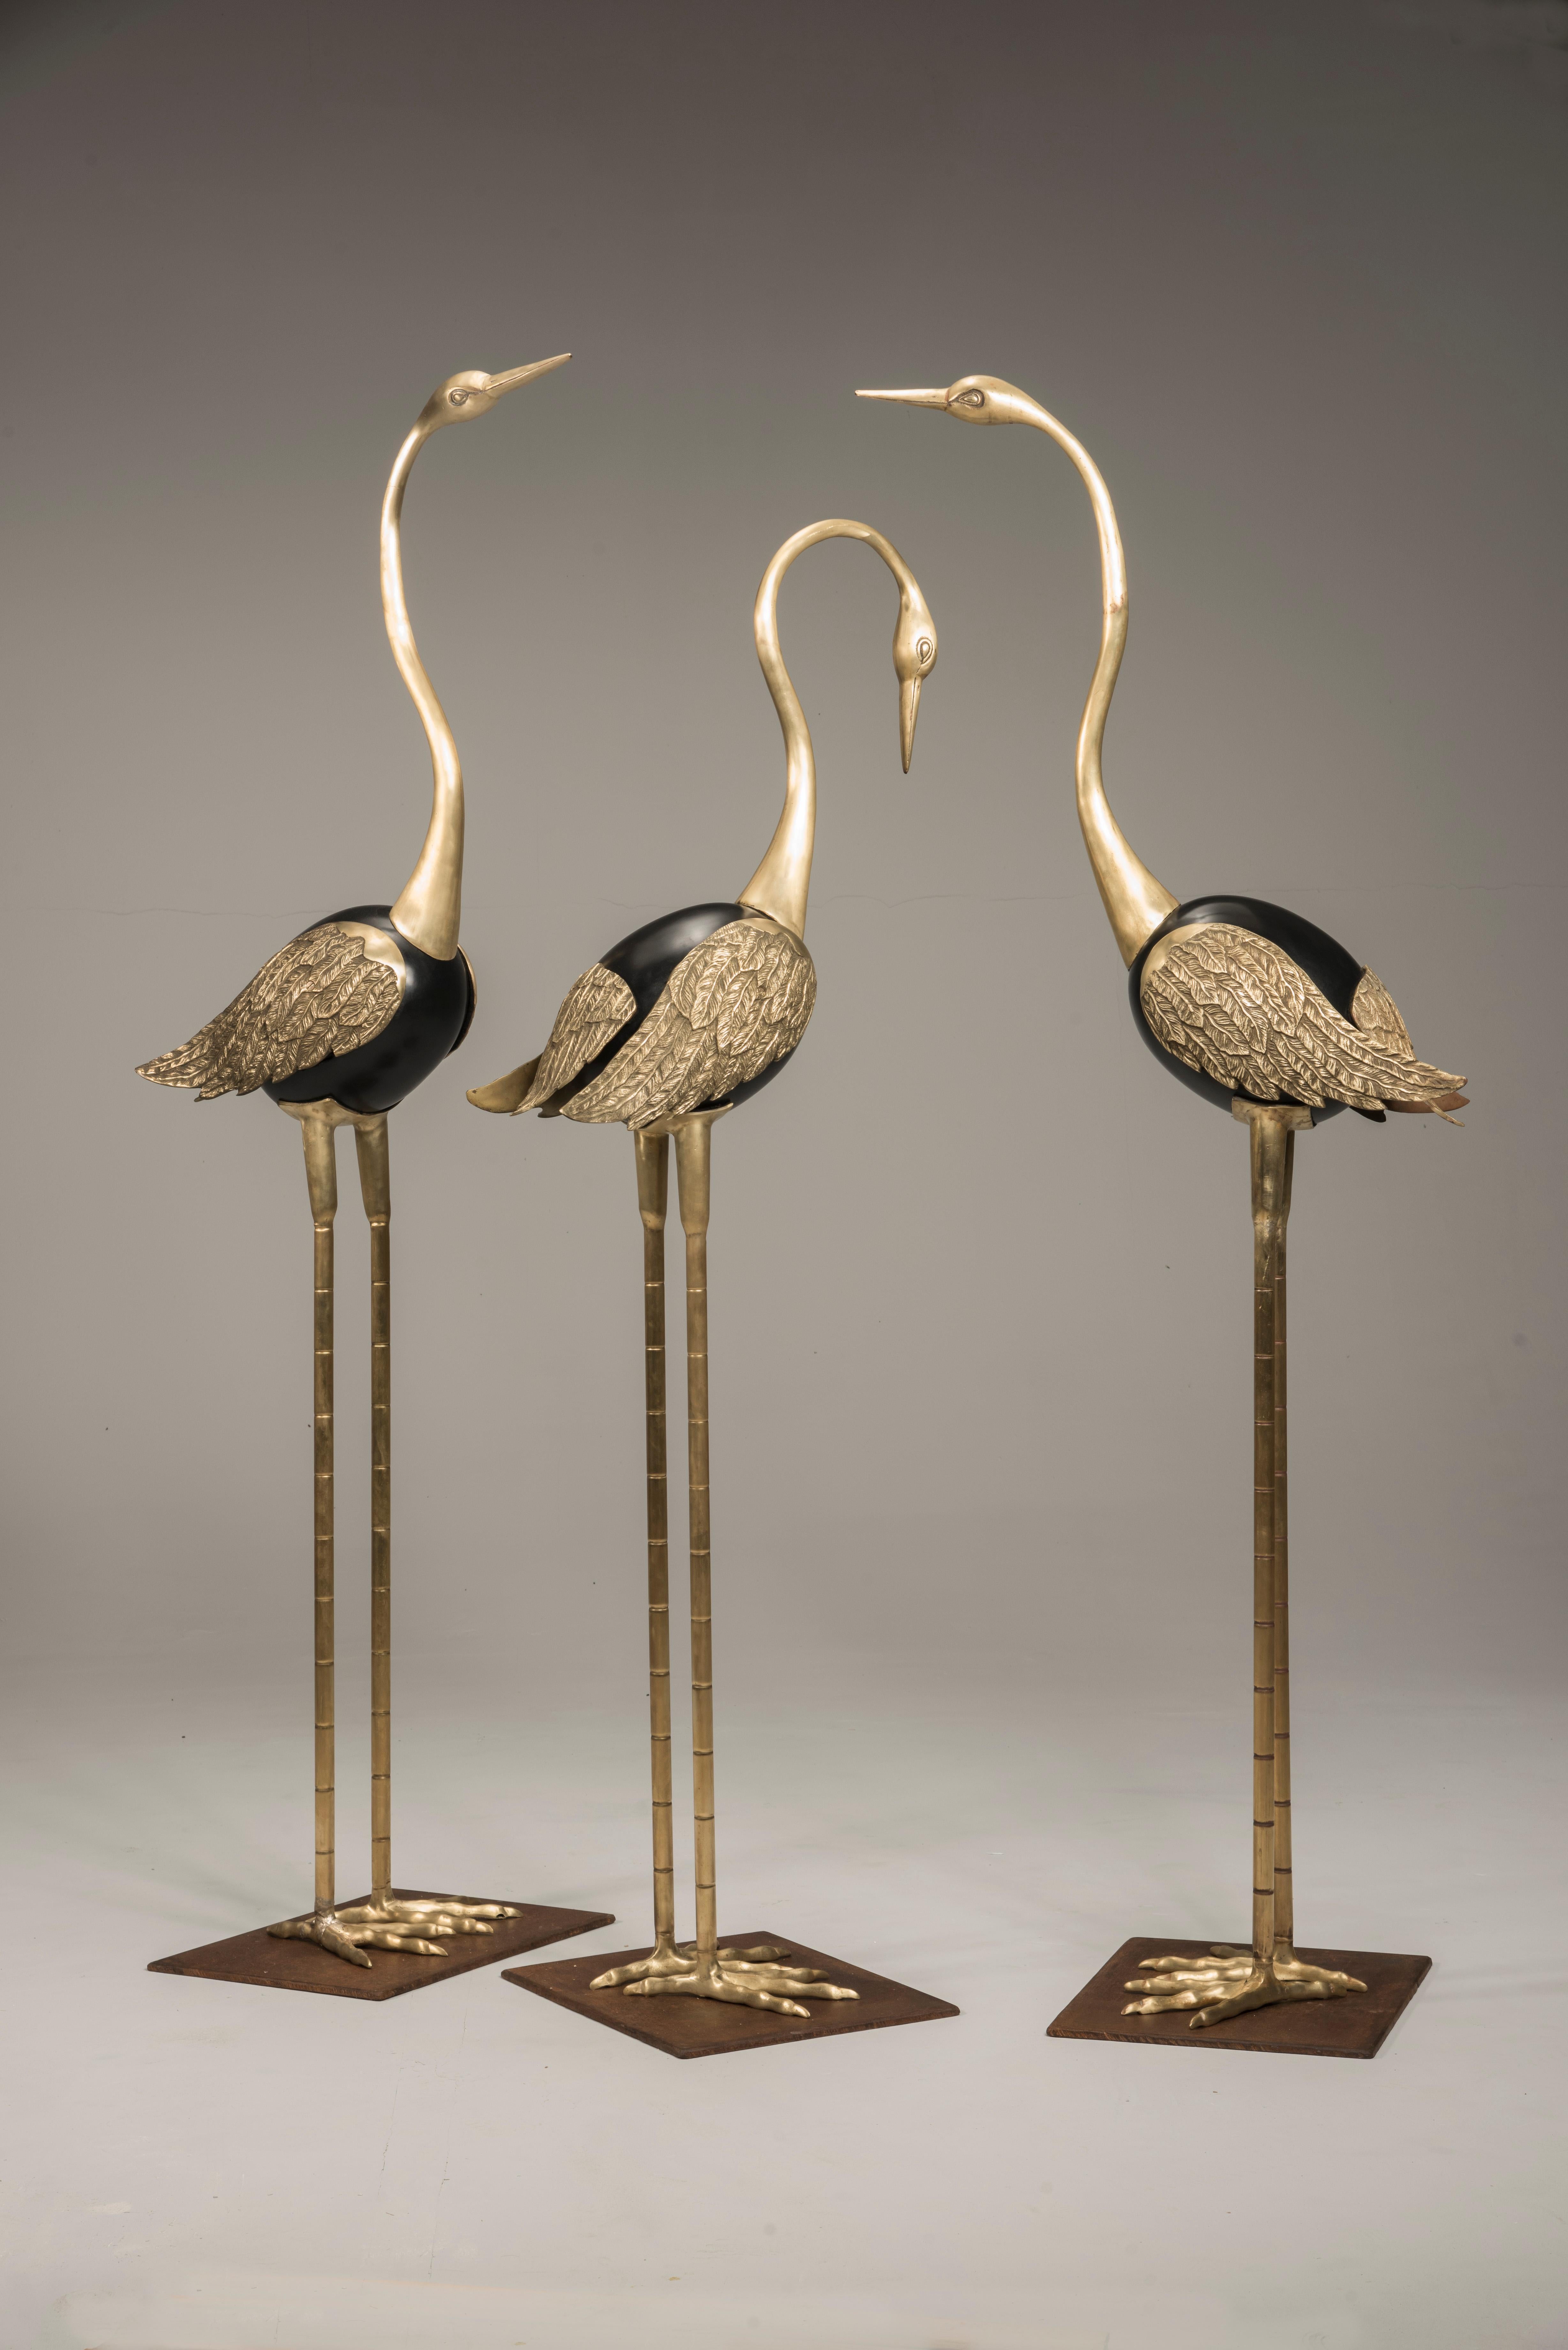 Three Italian Art Deco sculptures representing standing flamingos with three different poses of the head and the neck. They are made of brass, with central rounded body lacquered in black. The wings are finely worked with feathers effect. They have